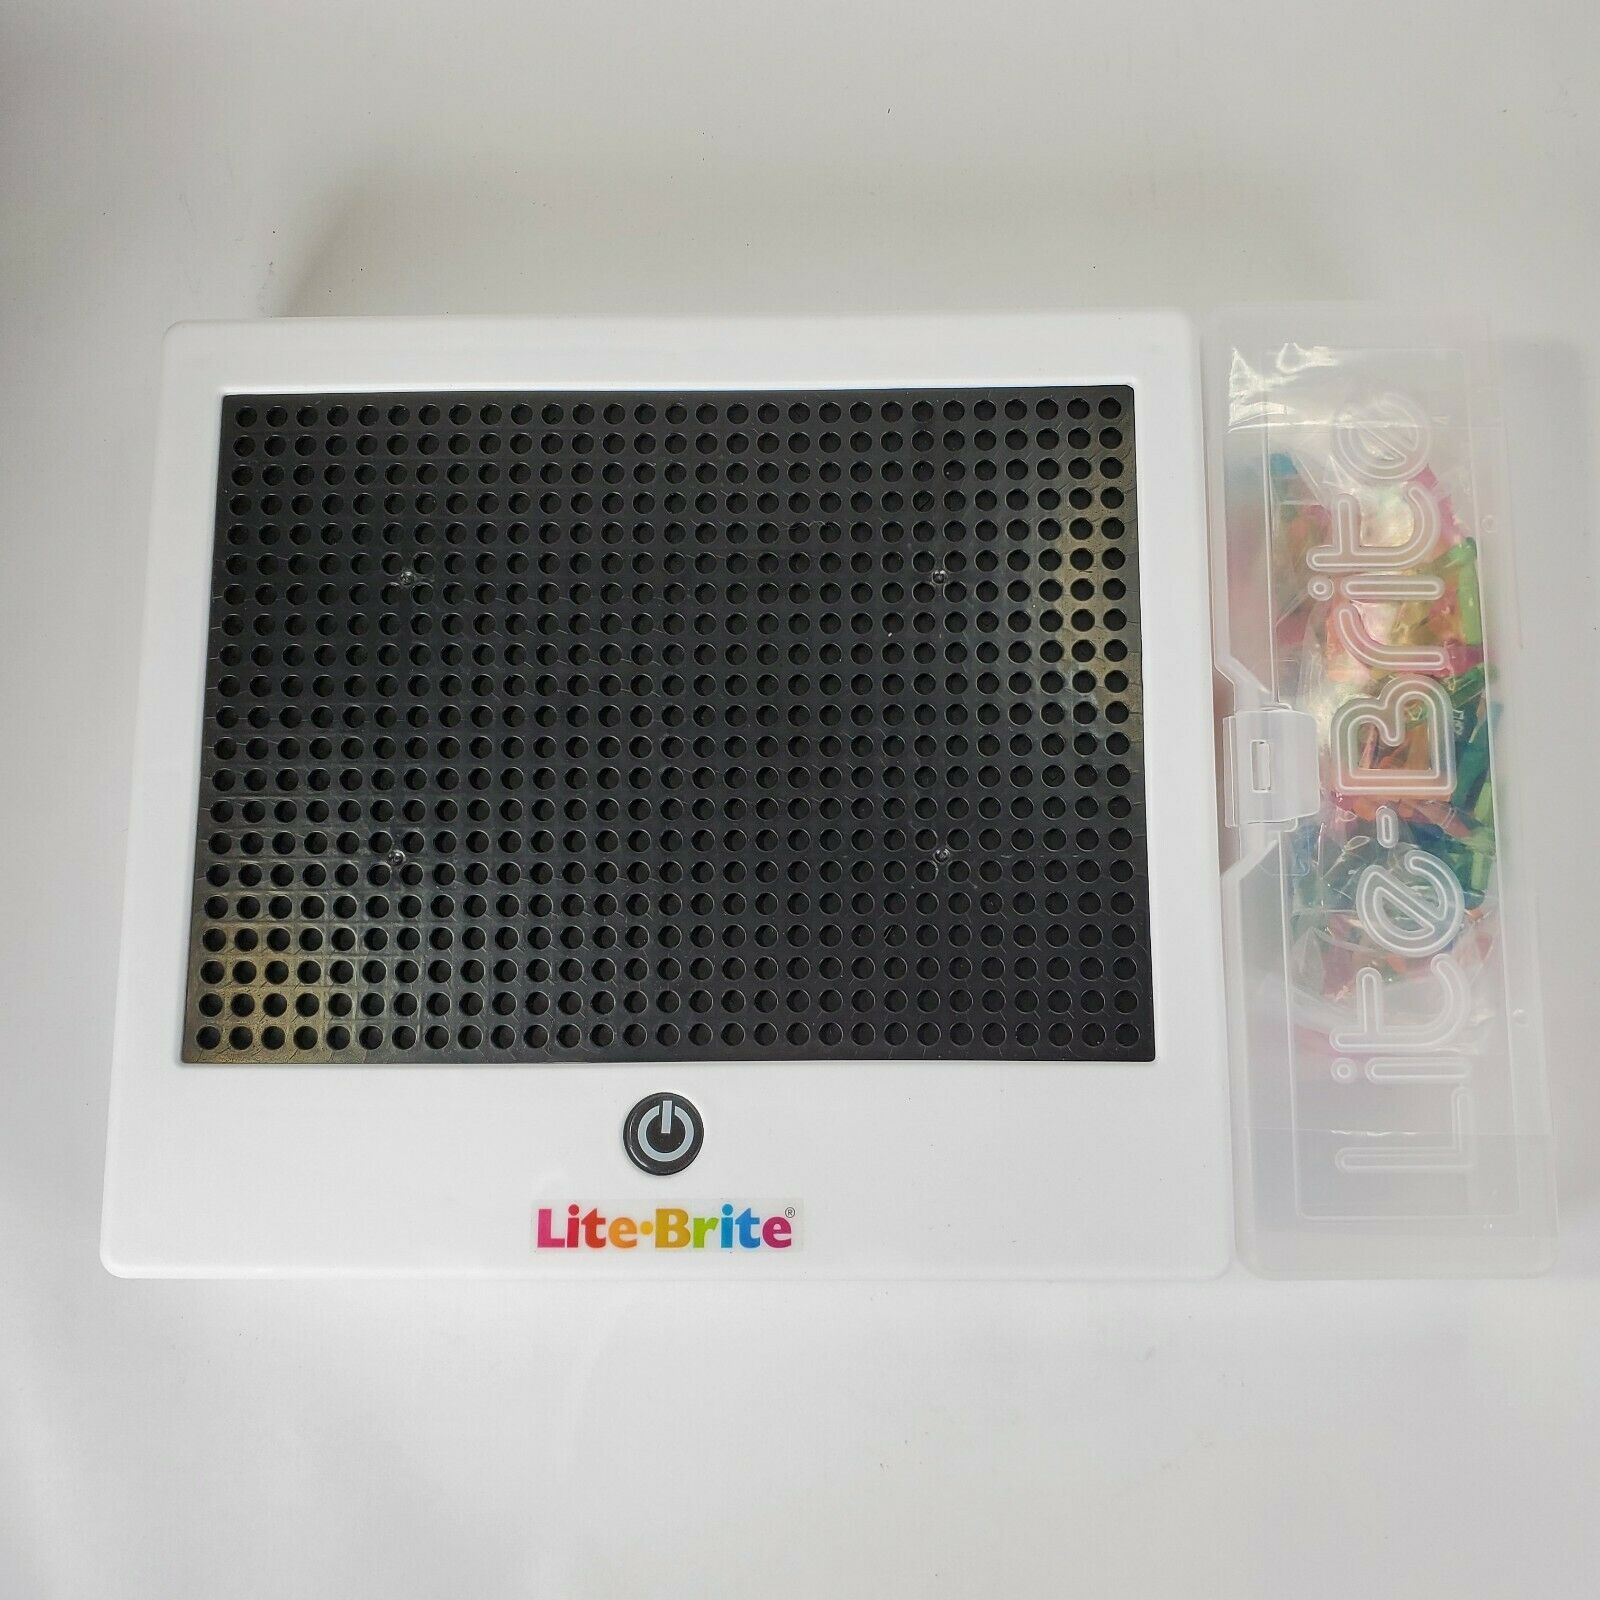 New Vintage Basic Fun Lite-brite Ultimate Classic Toy 02215